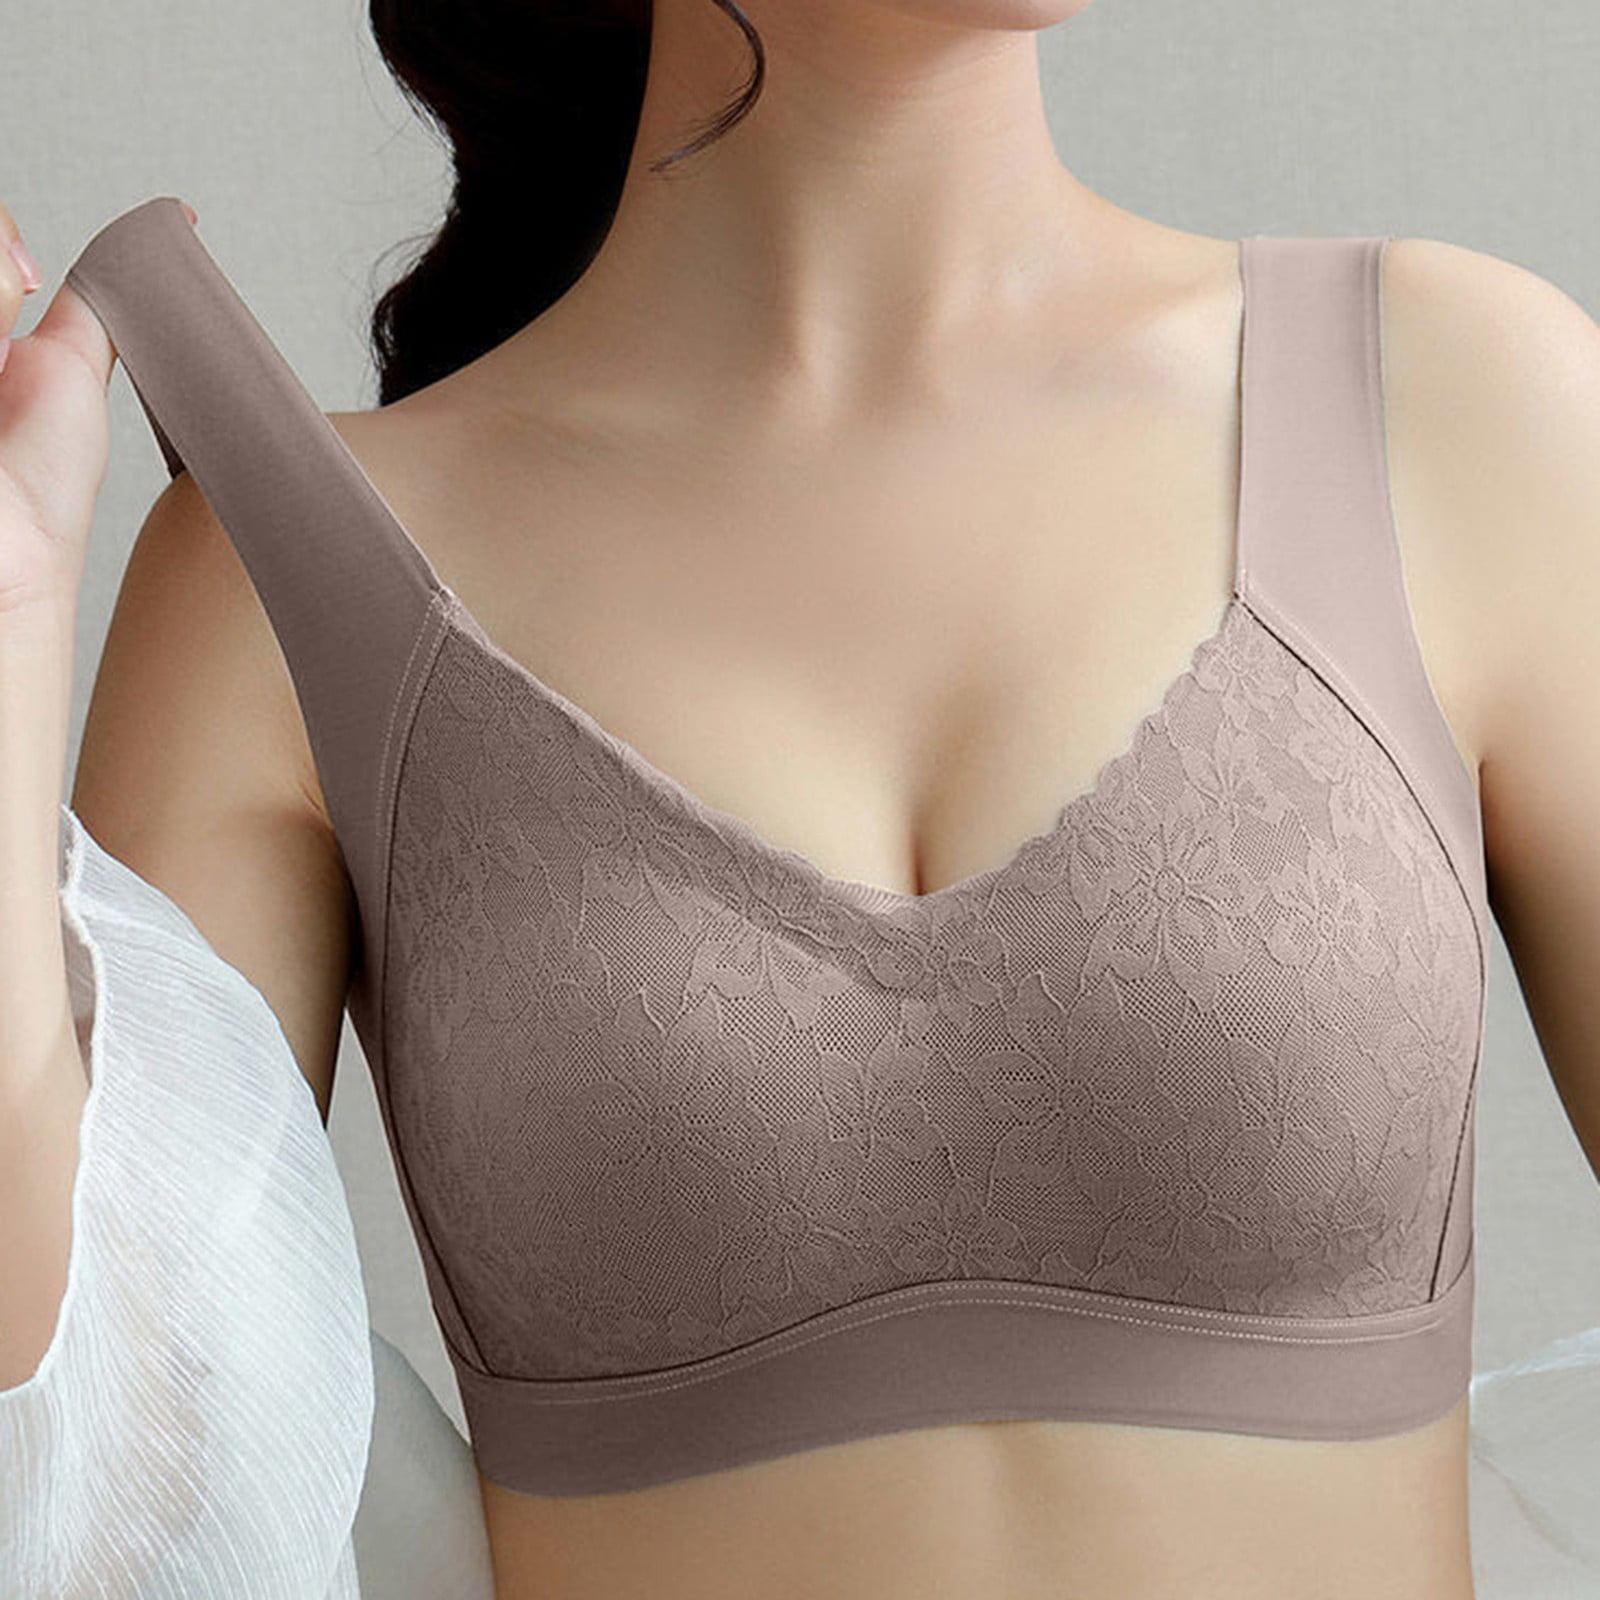 PMUYBHF Strapless Bras for Women Wireless Bra Non-Slip Women's Minimalist  Lace and Back Gathered and Seamless and Comfortable Bra Push up Bras for